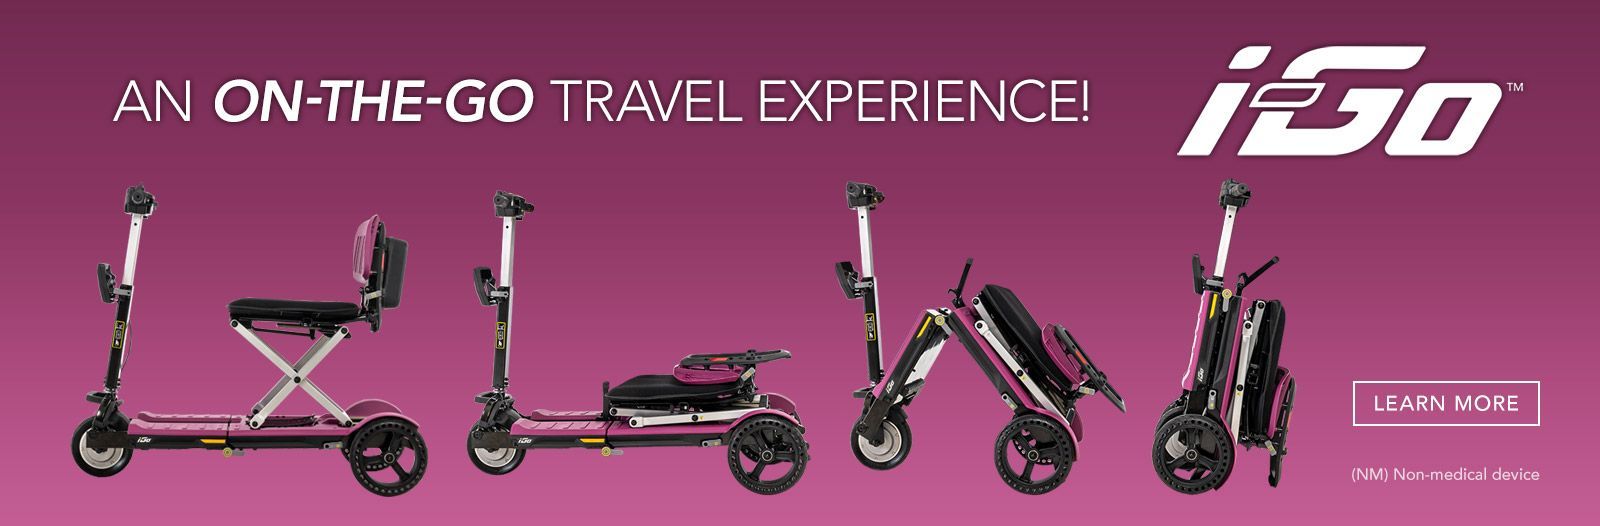 The iGo Folding Scooter is the latest super portable mobility device by Pride and will open your world to new experiences. It folds down for easy stowing.